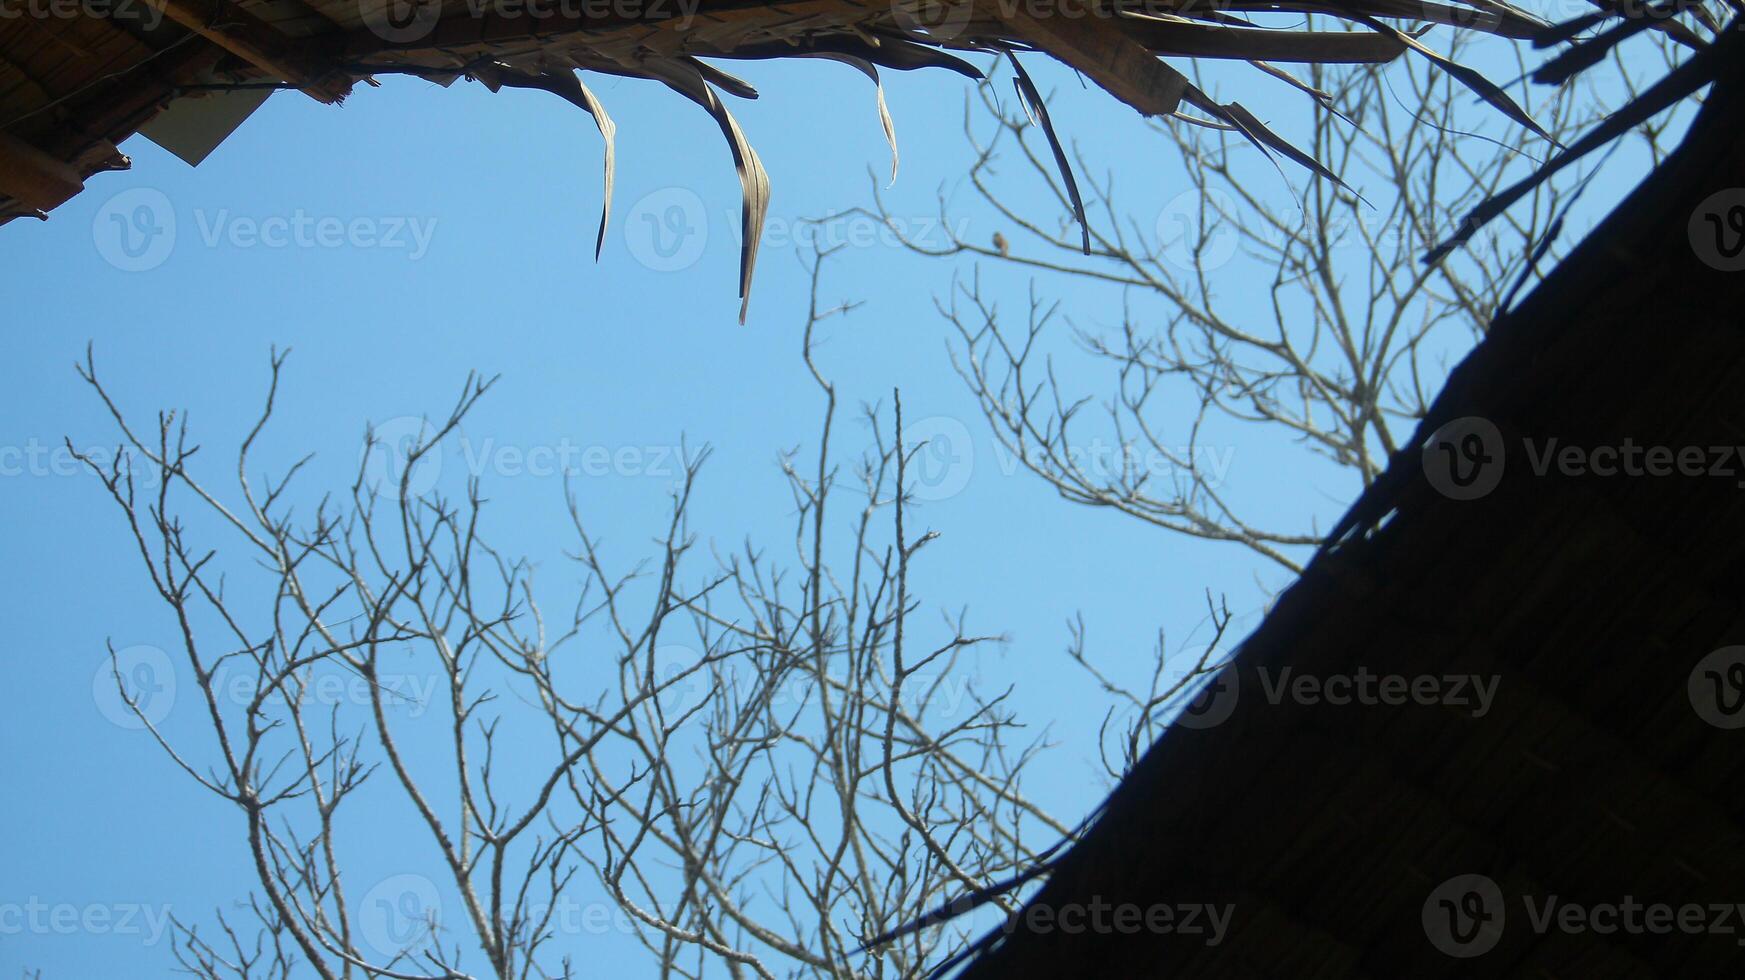 Tree branches whose leaves have fallen as a result of the dry season photo